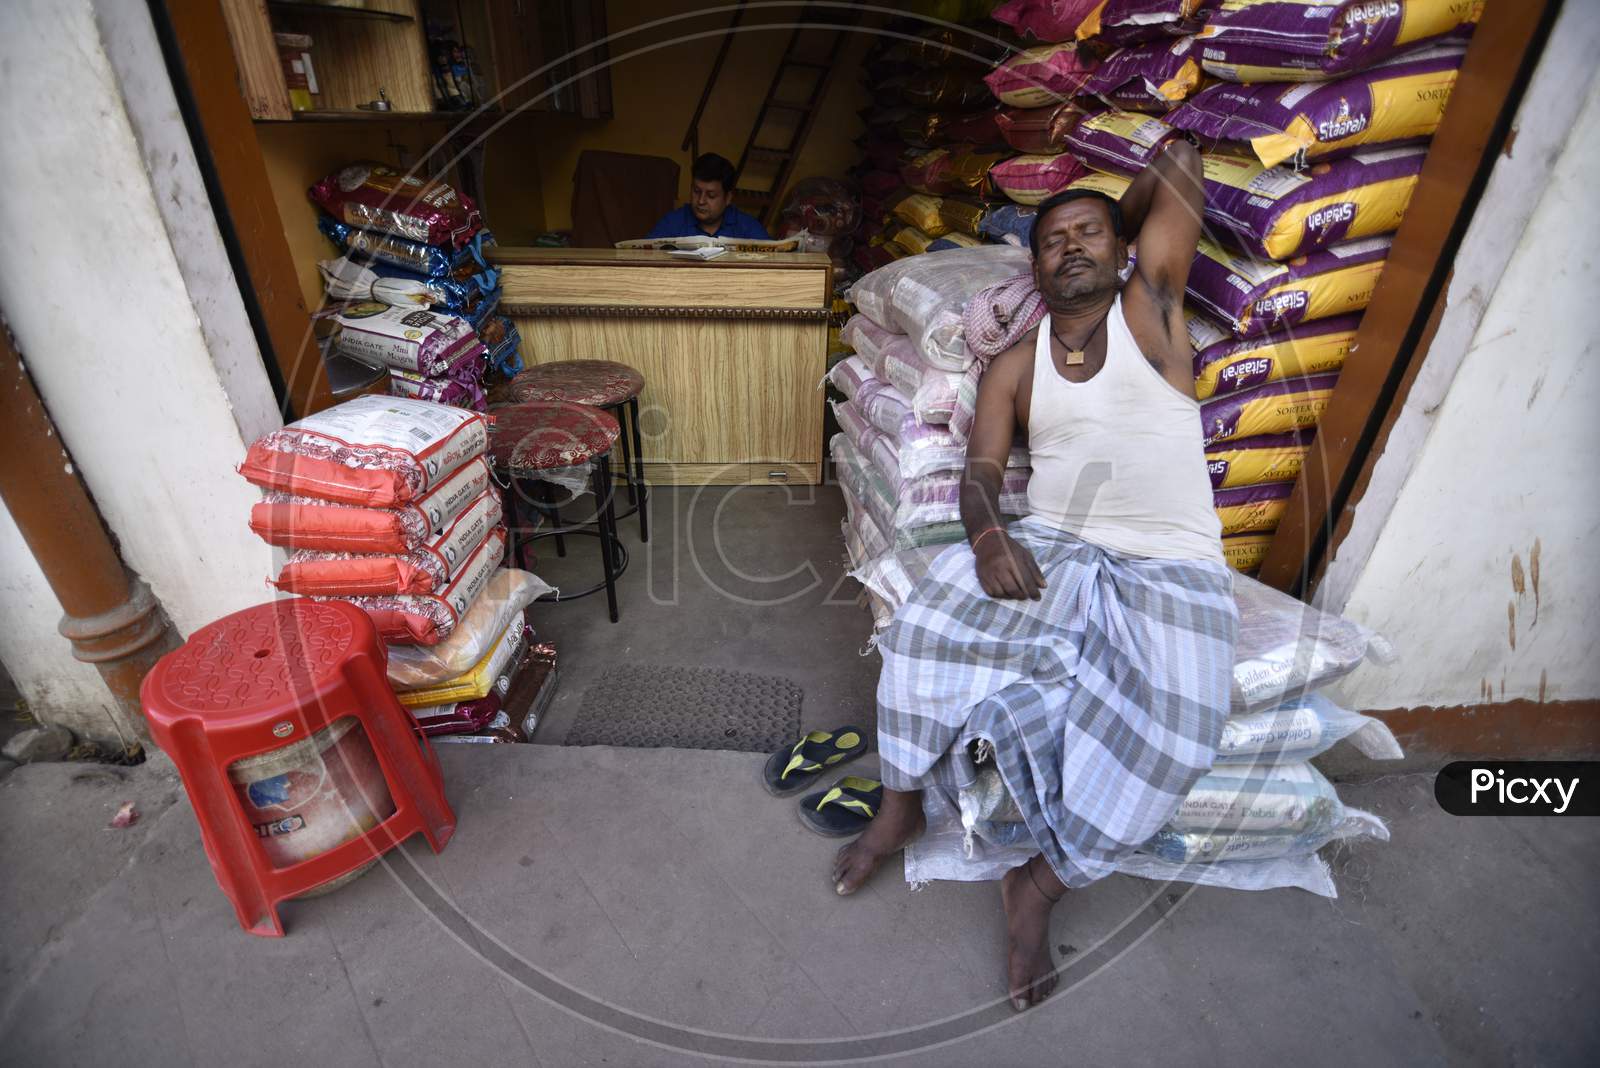 Daily Labor Worker  Taking Rest on Goods Bags At Vendor Shops In Guwahati Fancy Bazaar